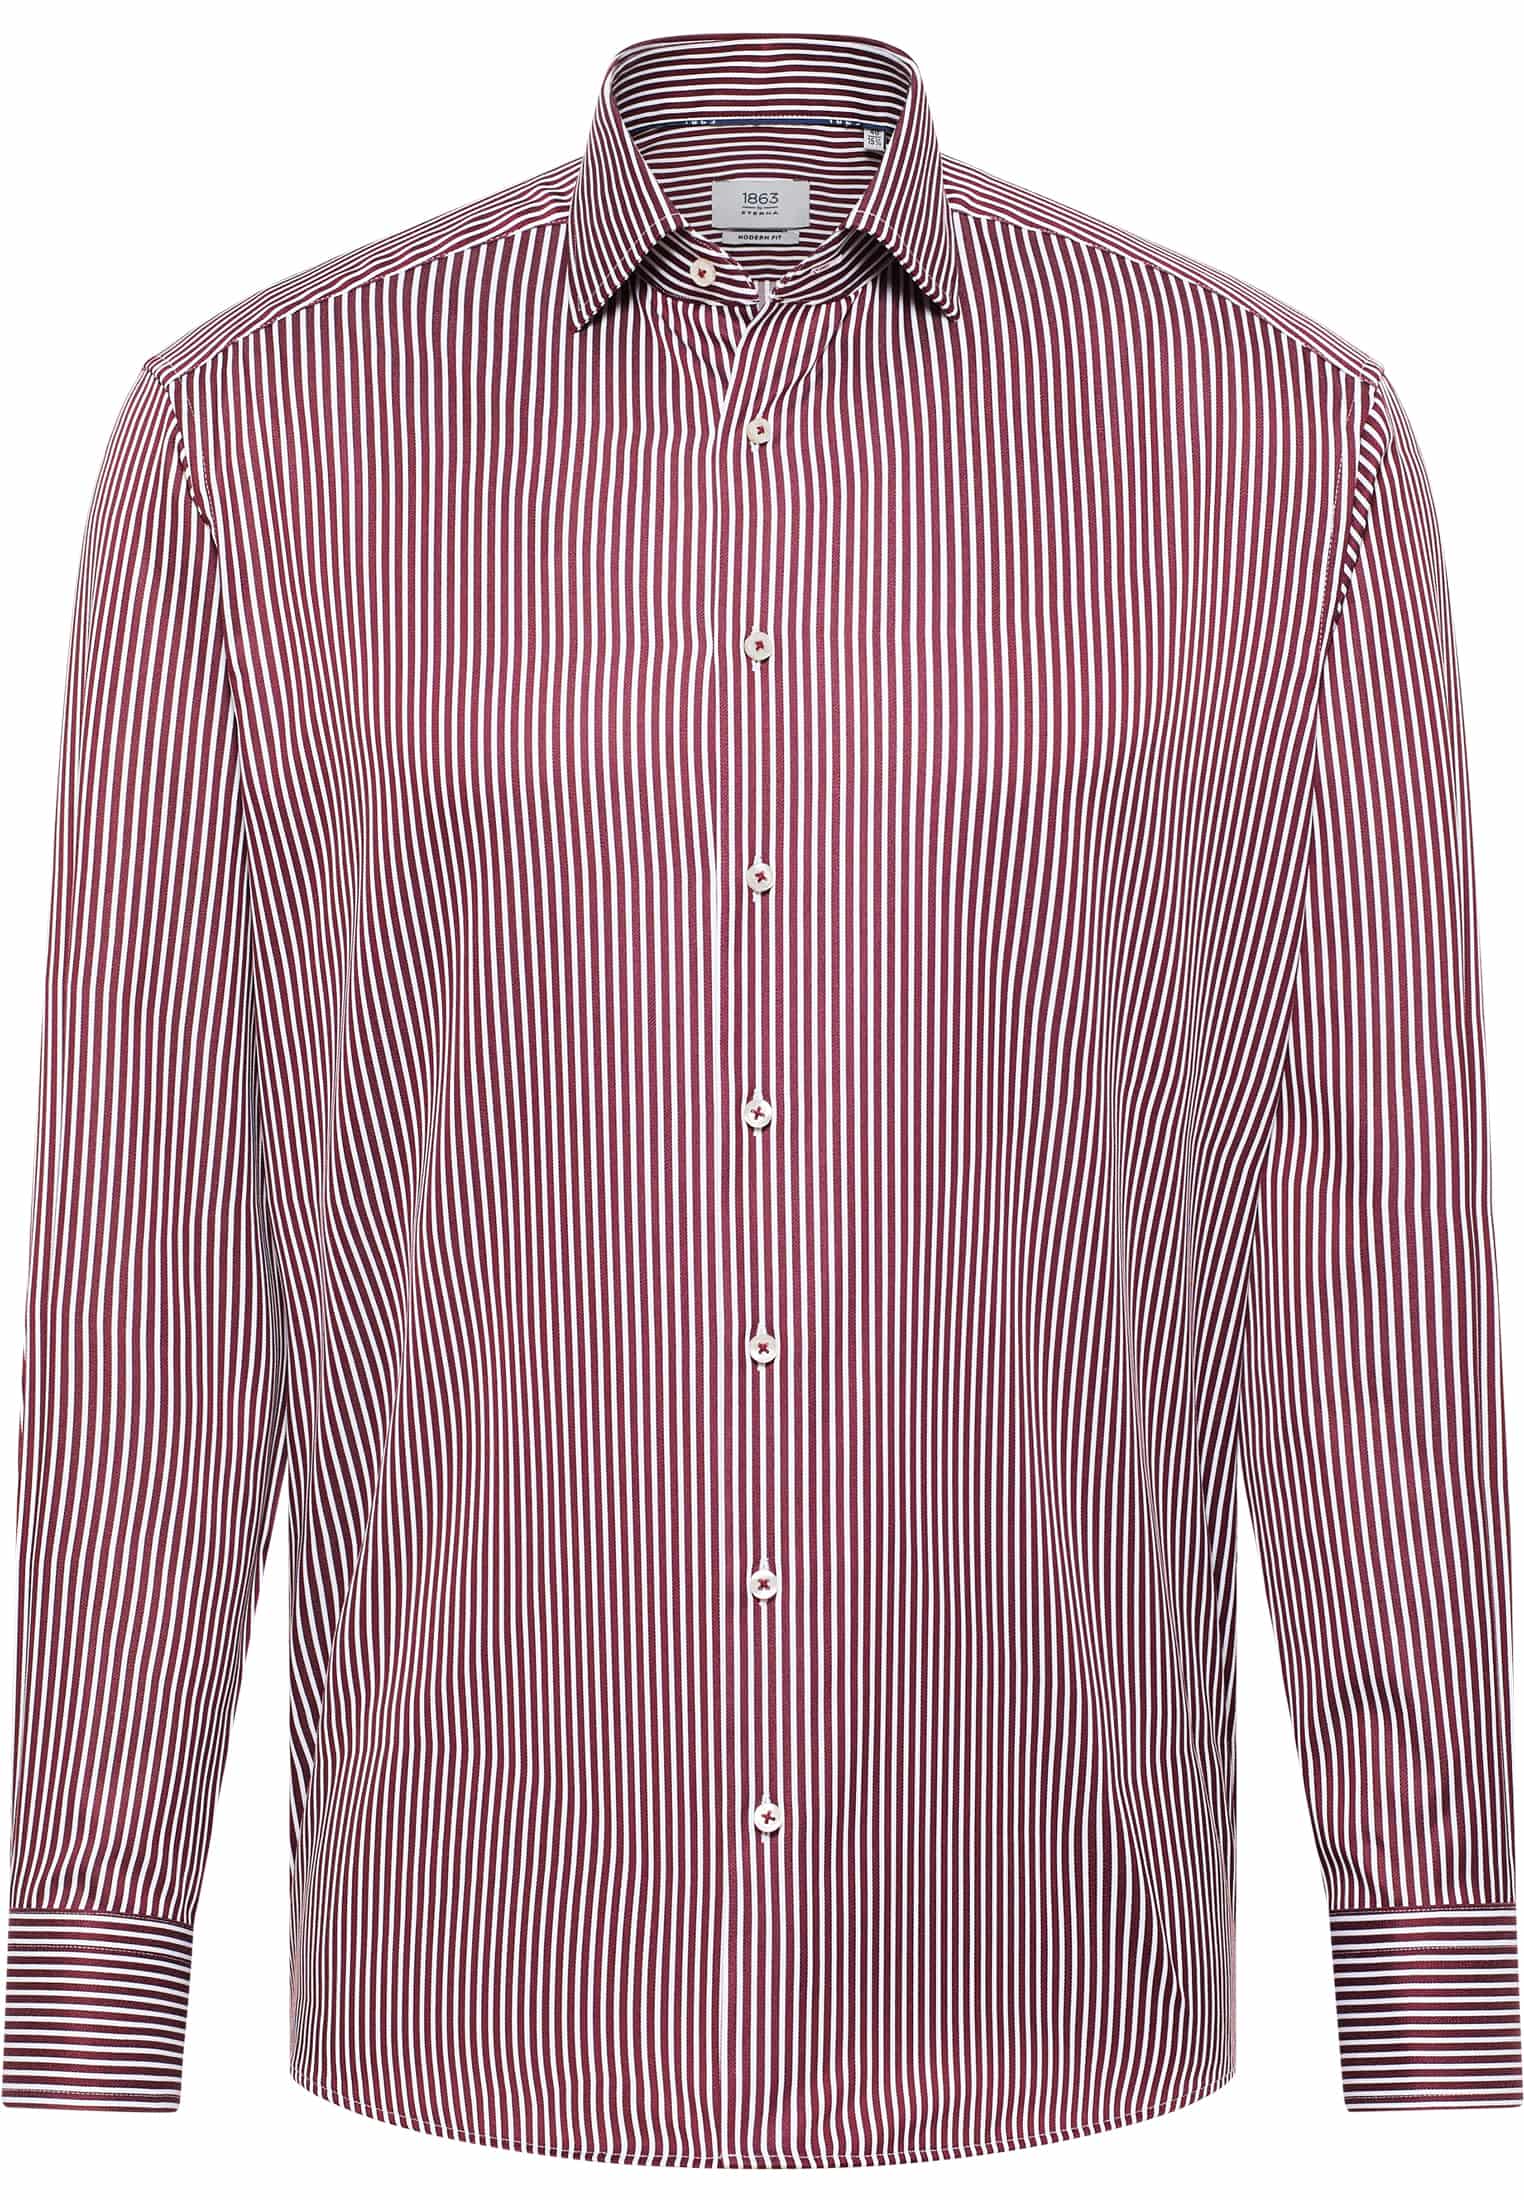 COMFORT FIT Shirt in wine red striped